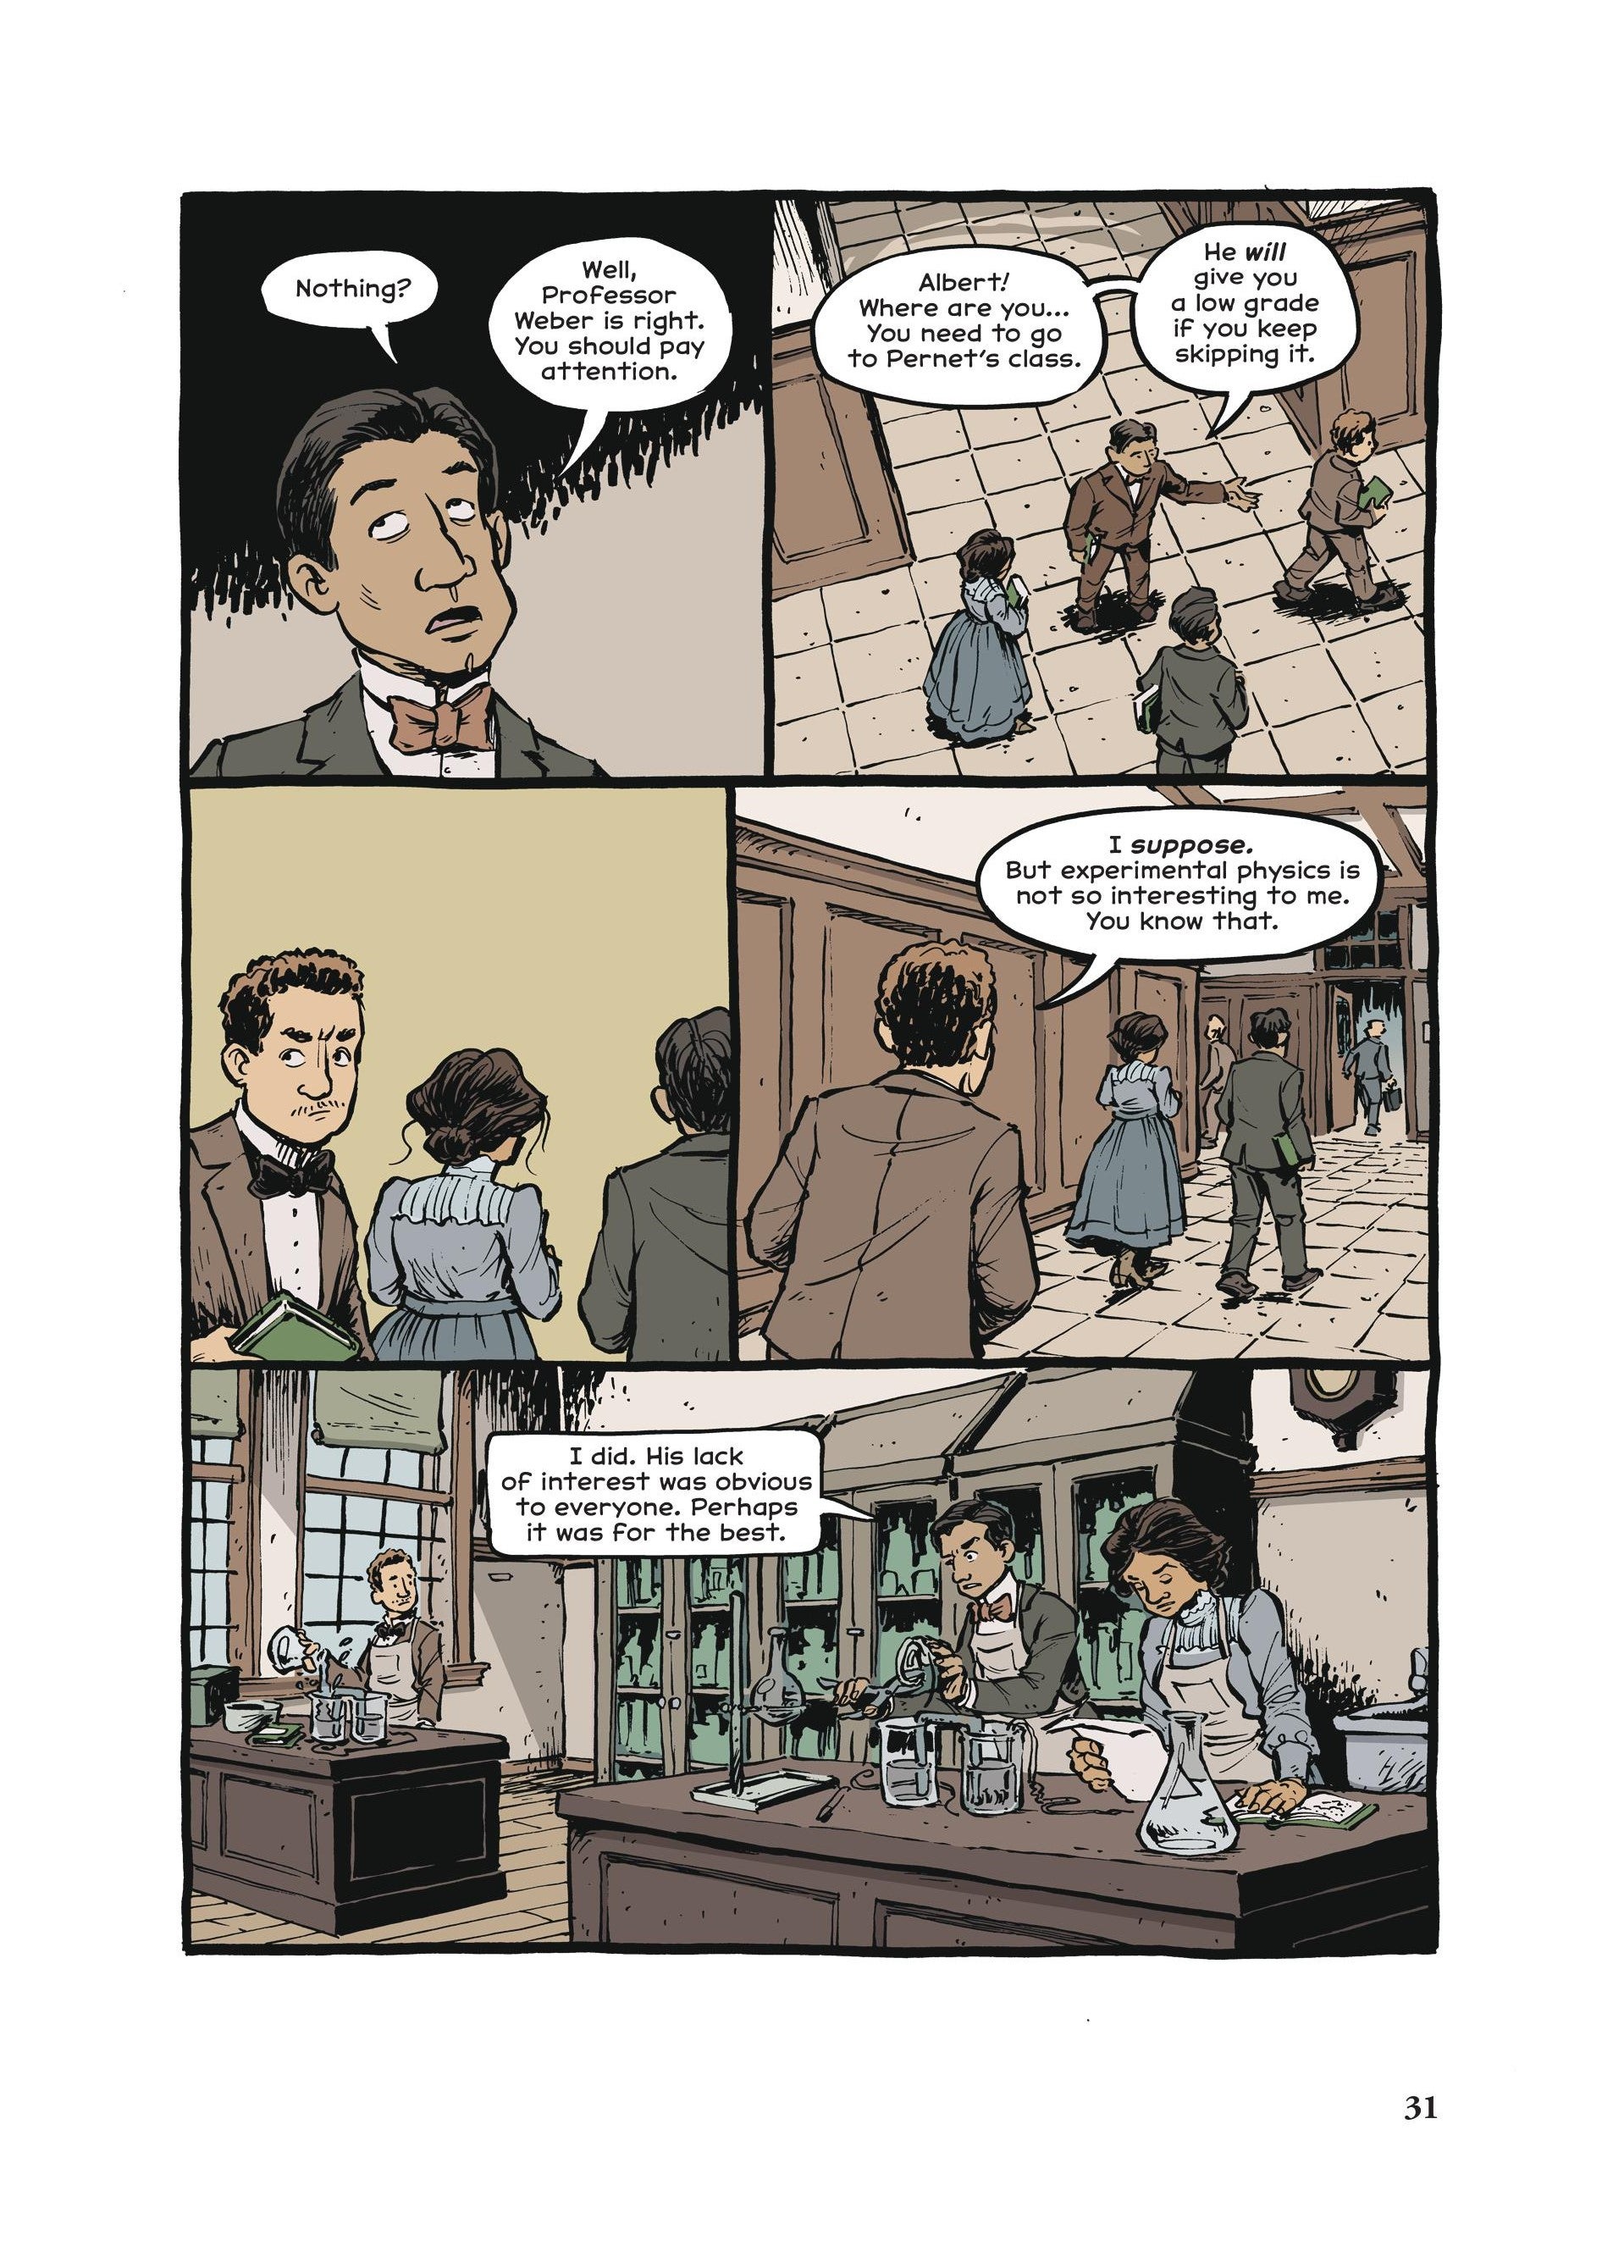 Comics page, Marcel Grossman encourages Einstein to attend an experimental physics class